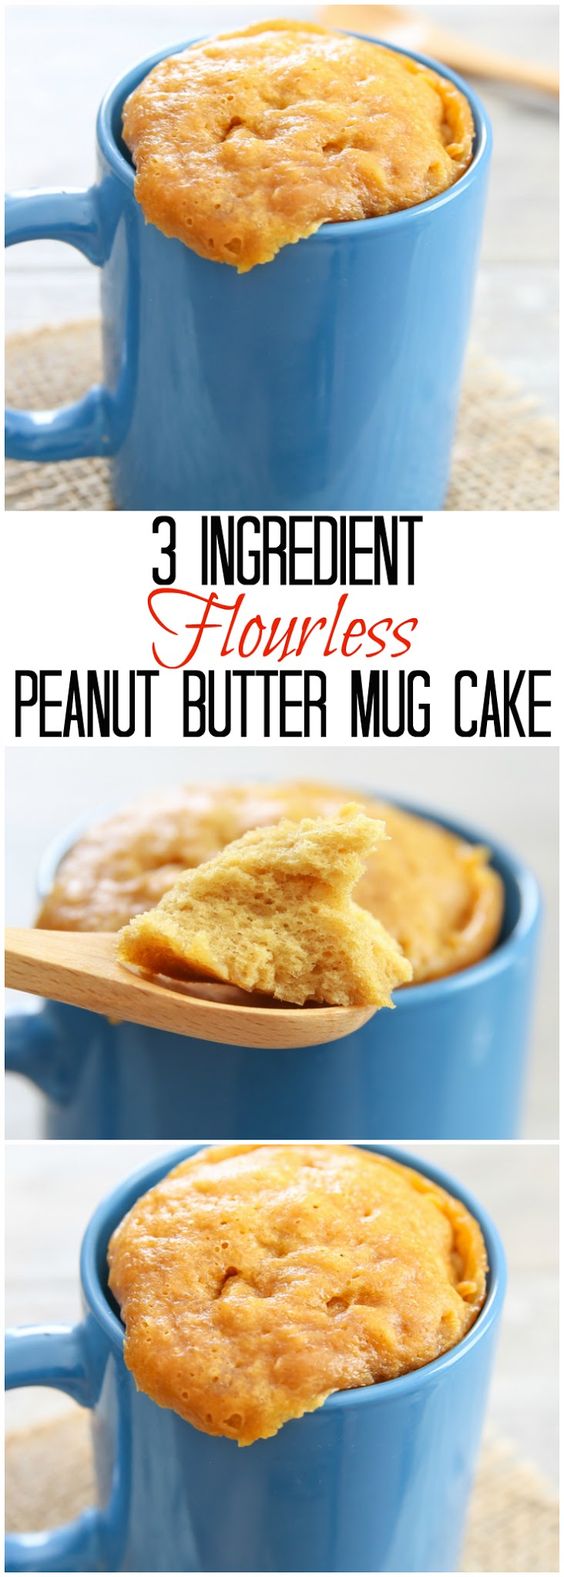 3 Ingredient Flourless Peanut Butter Mug Cake. Easy and ready in 5 minutes and you won't believe it is flourless!